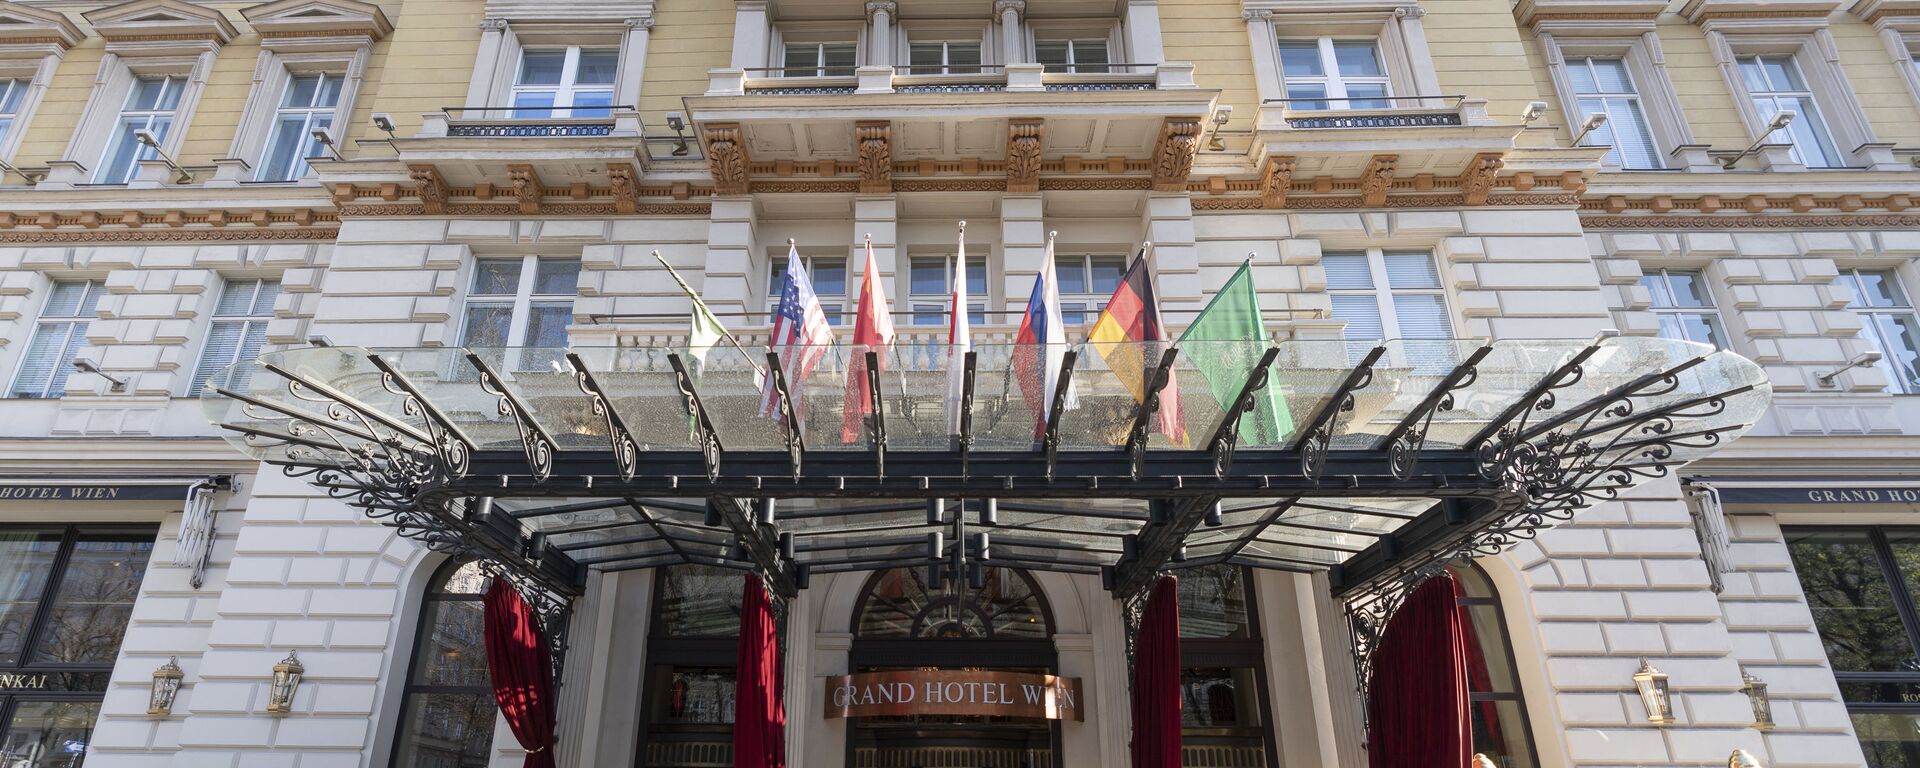 Exterior view of the 'Grand Hotel Wien' in Vienna, Austria, Friday, April 9, 2021 where closed-door nuclear talks with Iran take place.  - Sputnik International, 1920, 31.01.2023